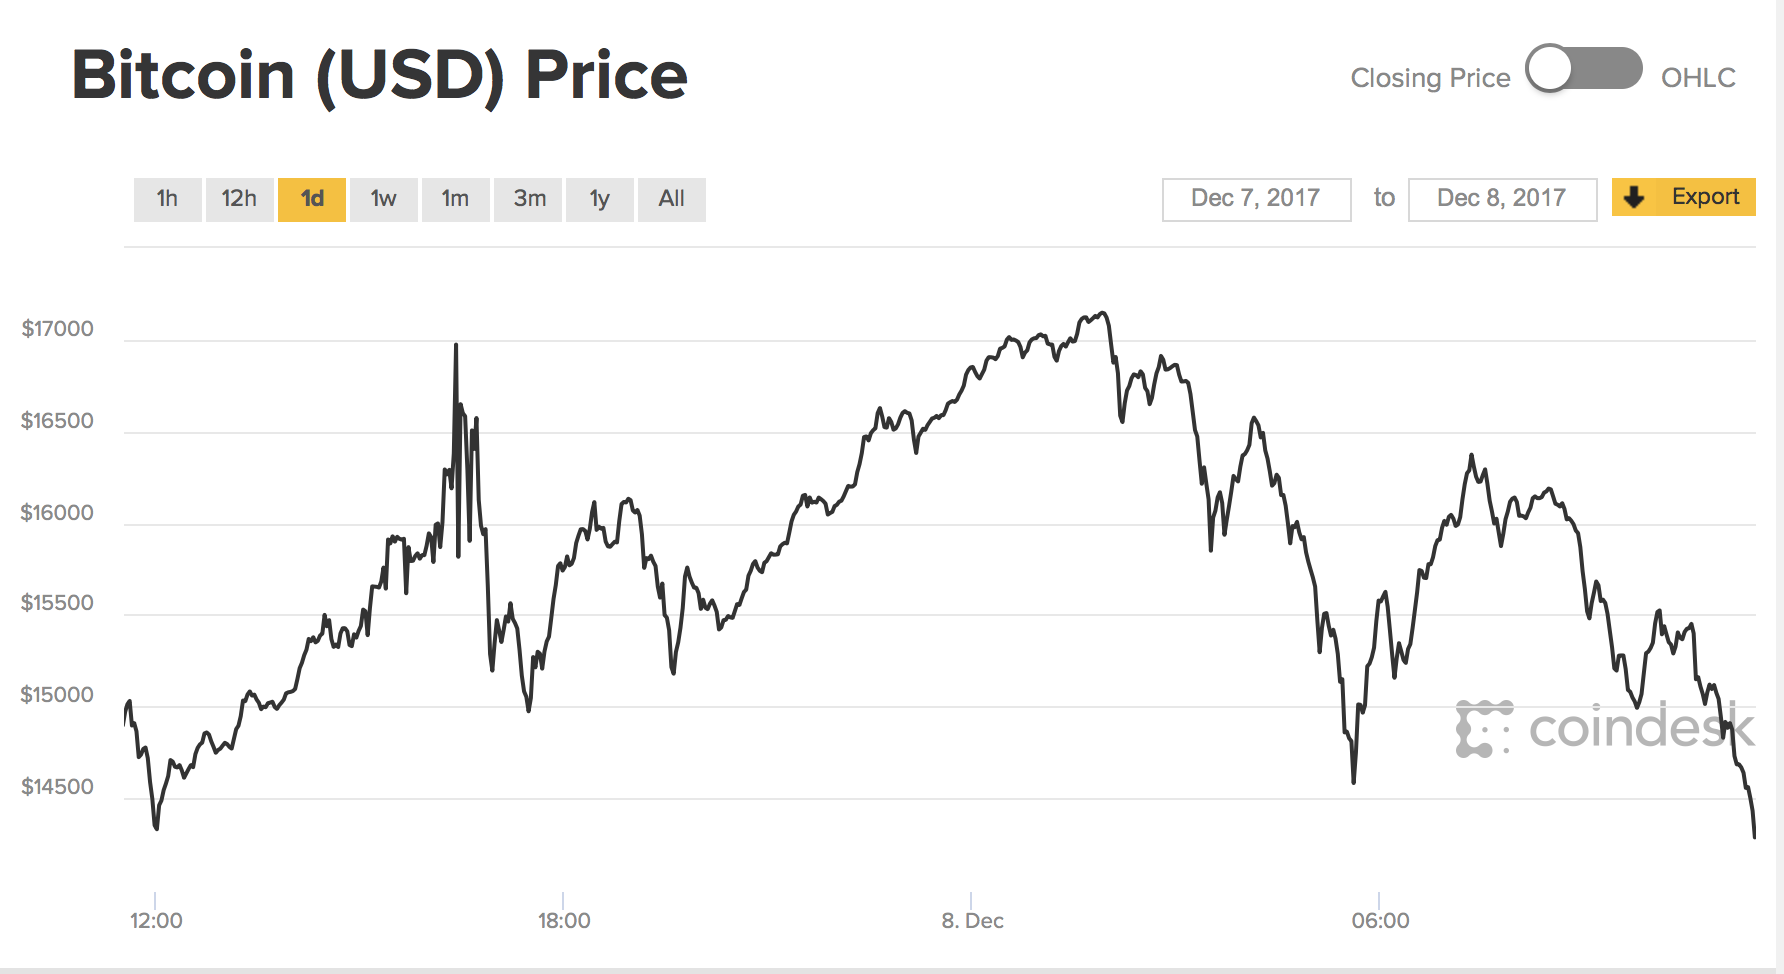 Why is bitcoin’s price so high?